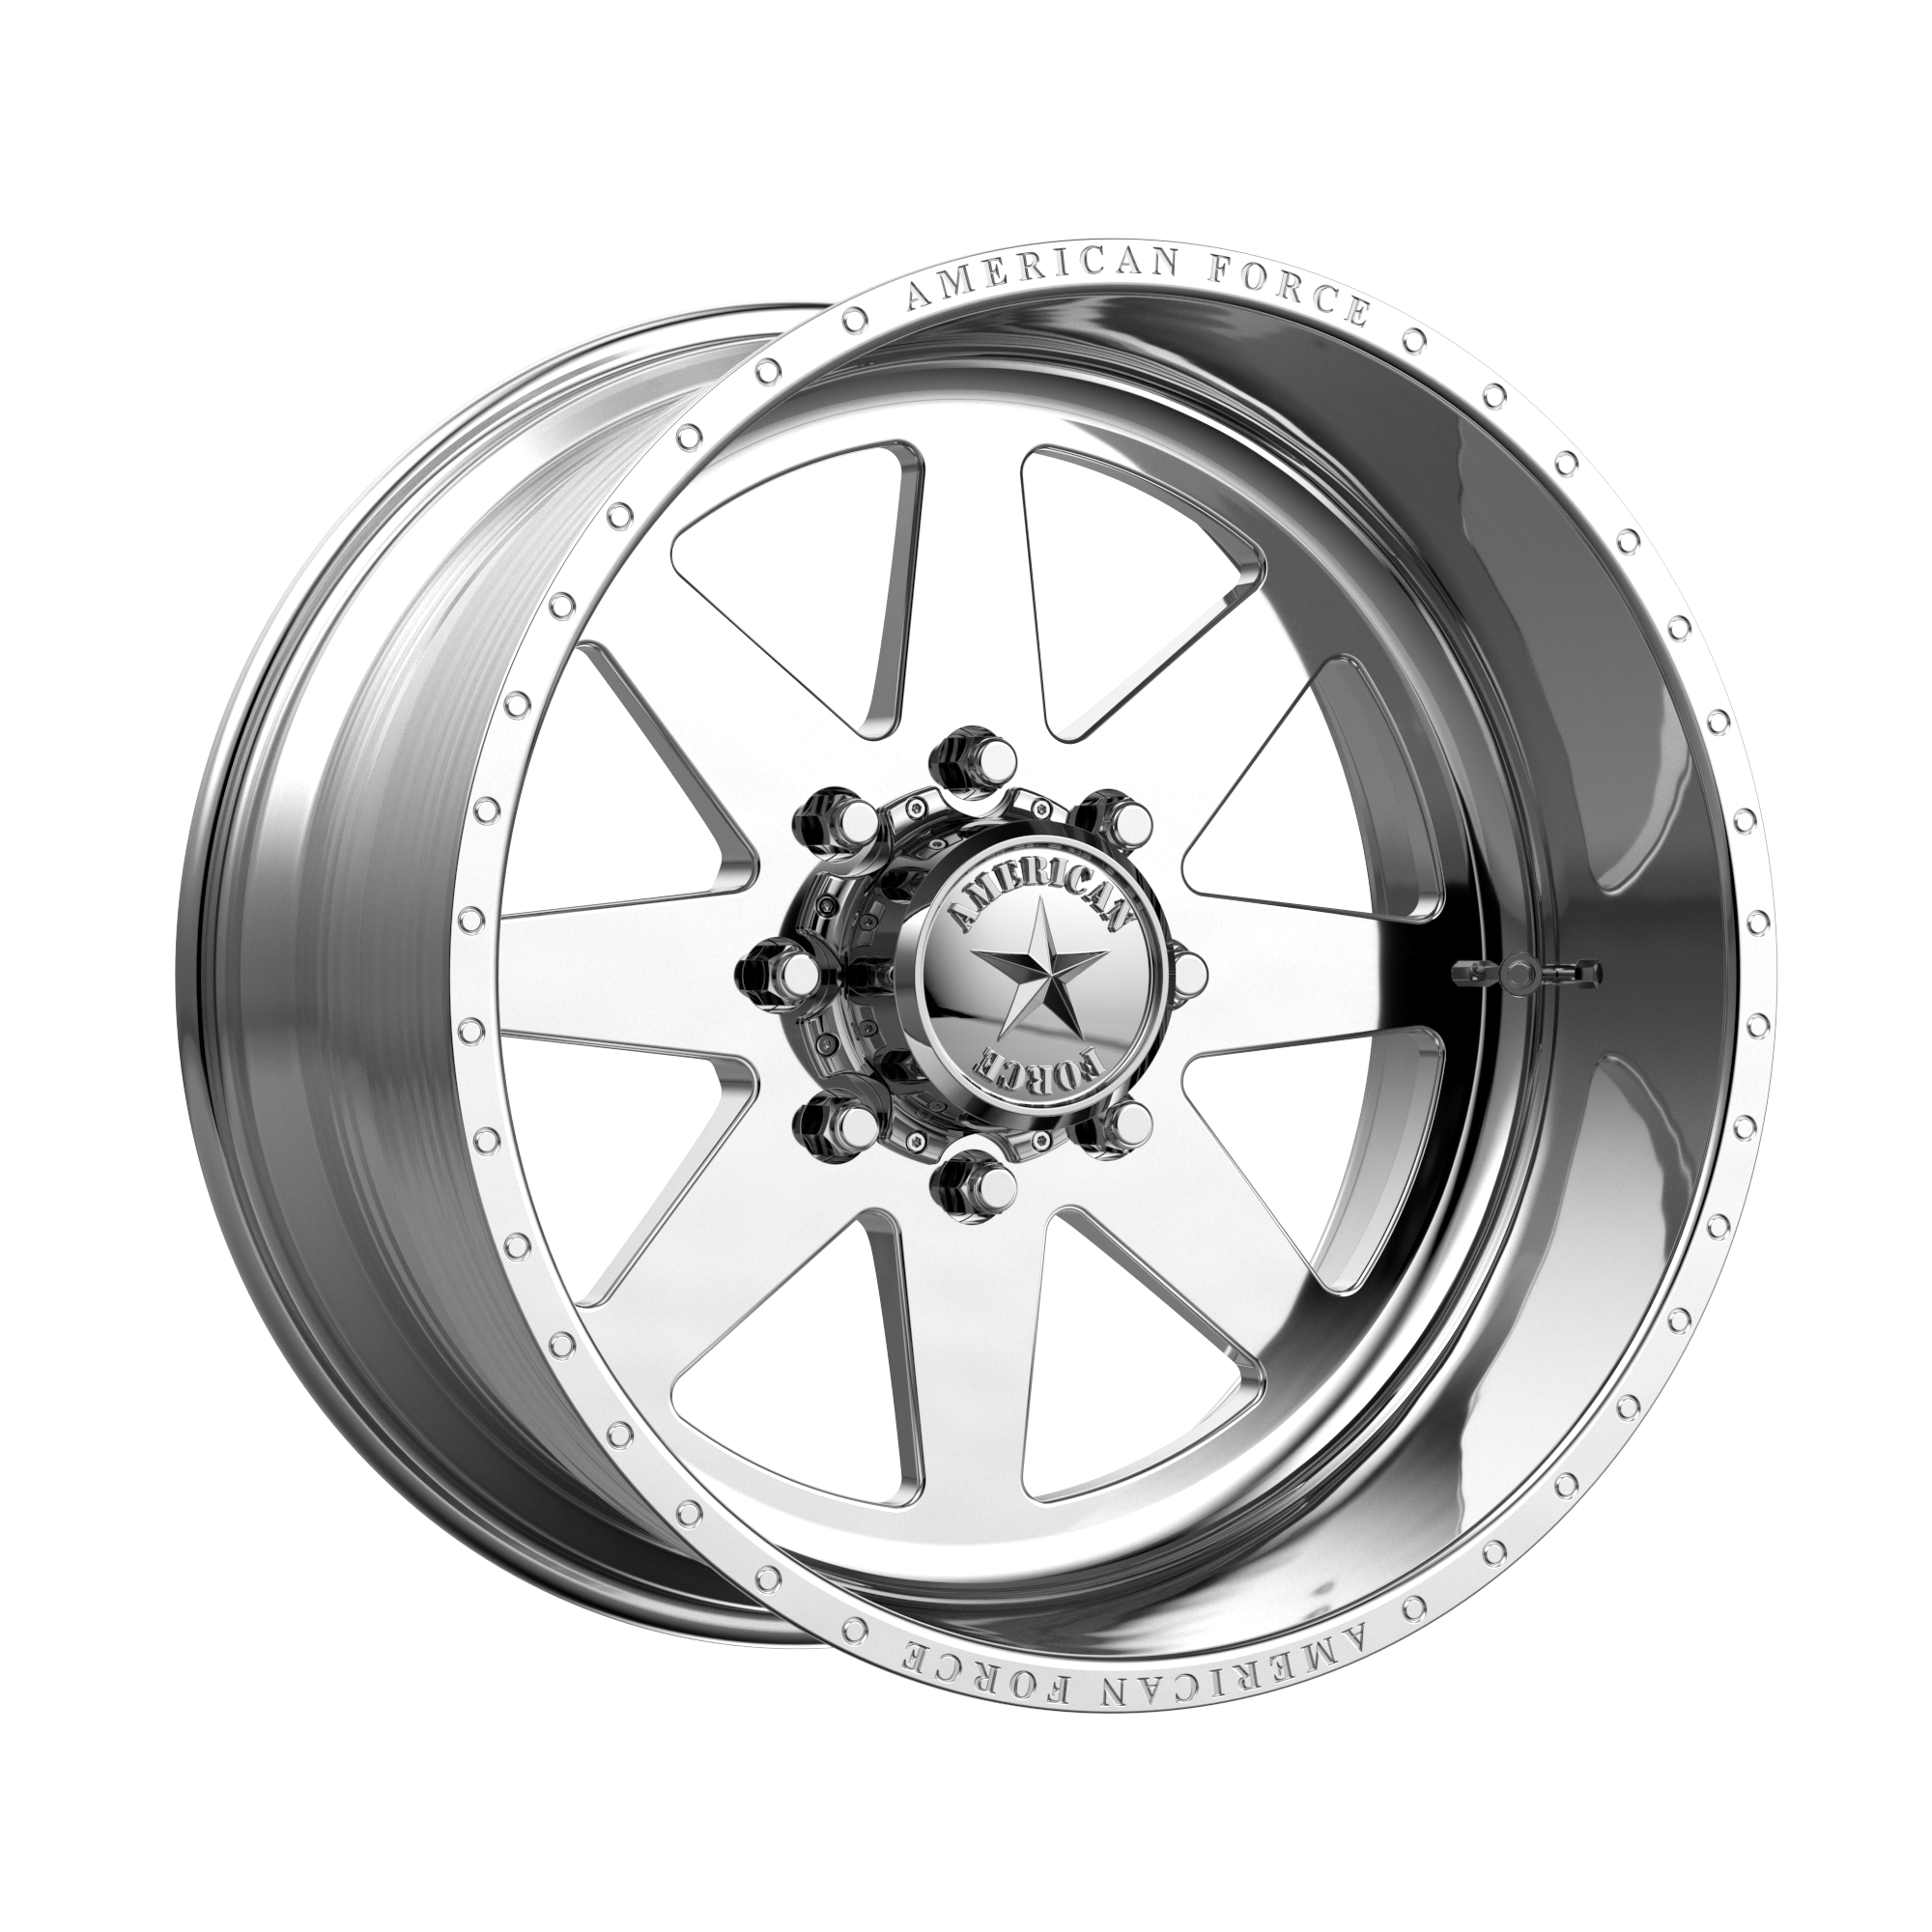 INDEPENDENCE SS 26x16 8x180.00 POLISHED (-101 mm) - Tires and Engine Performance